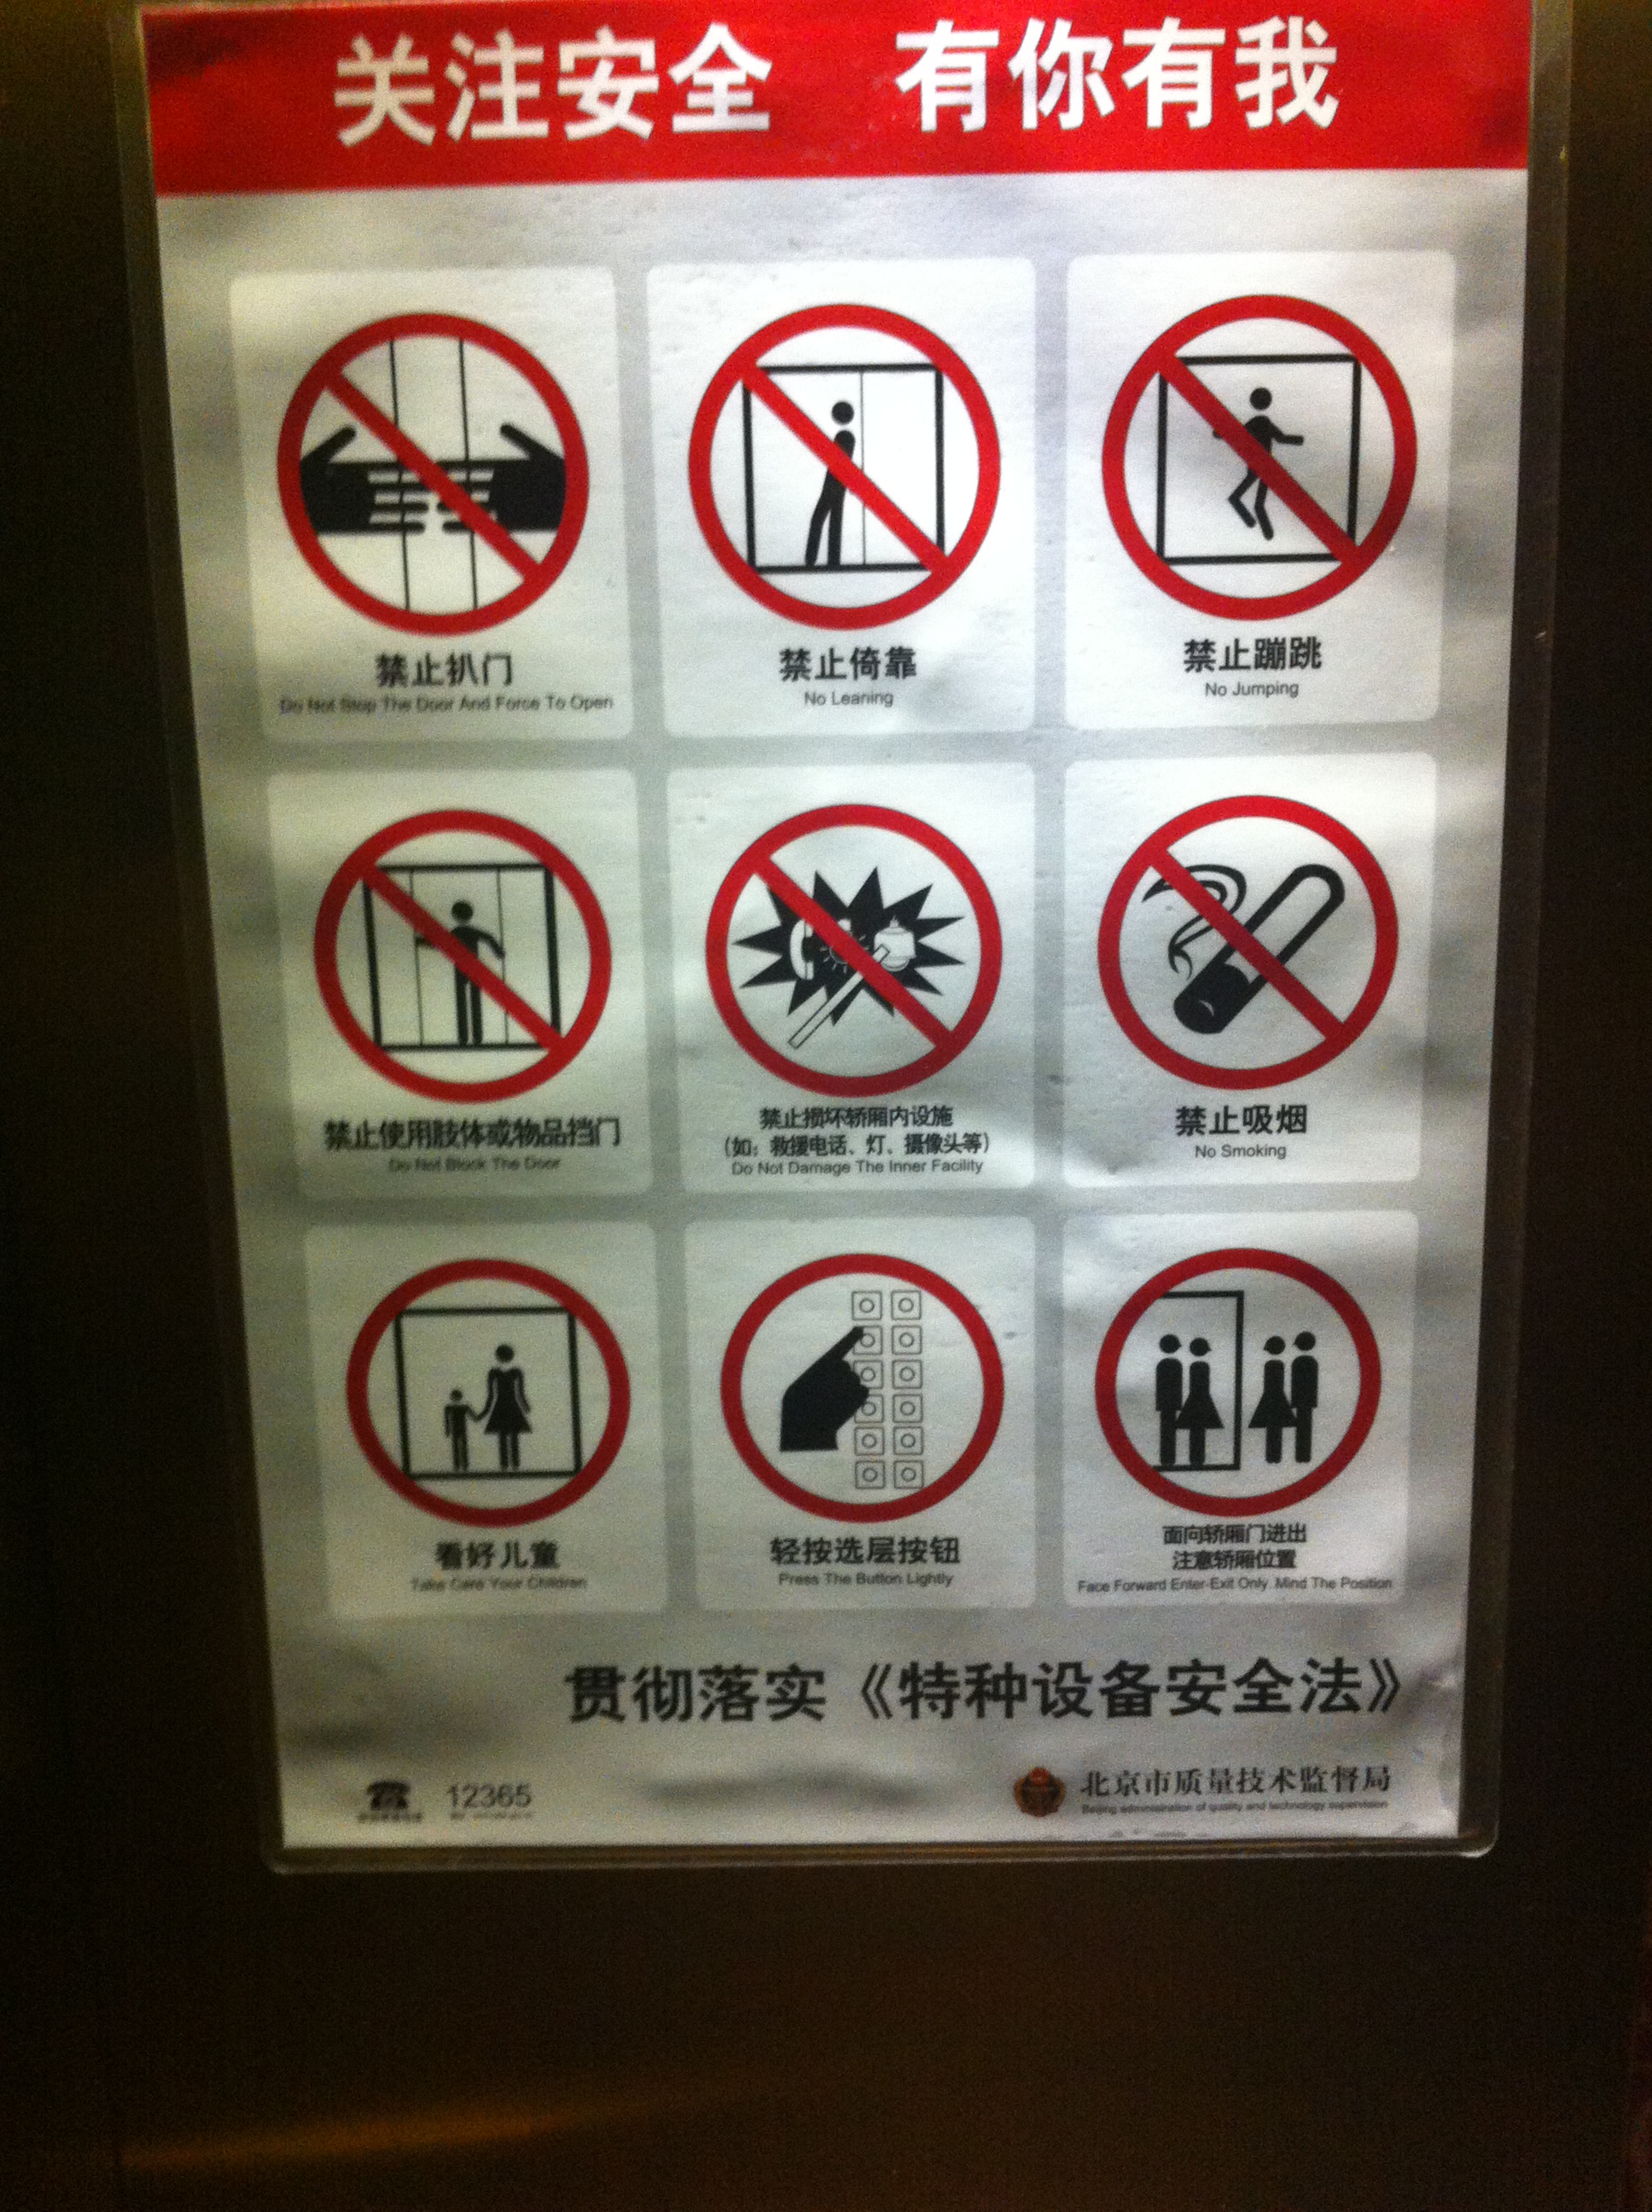 Signs of the World – Elevator